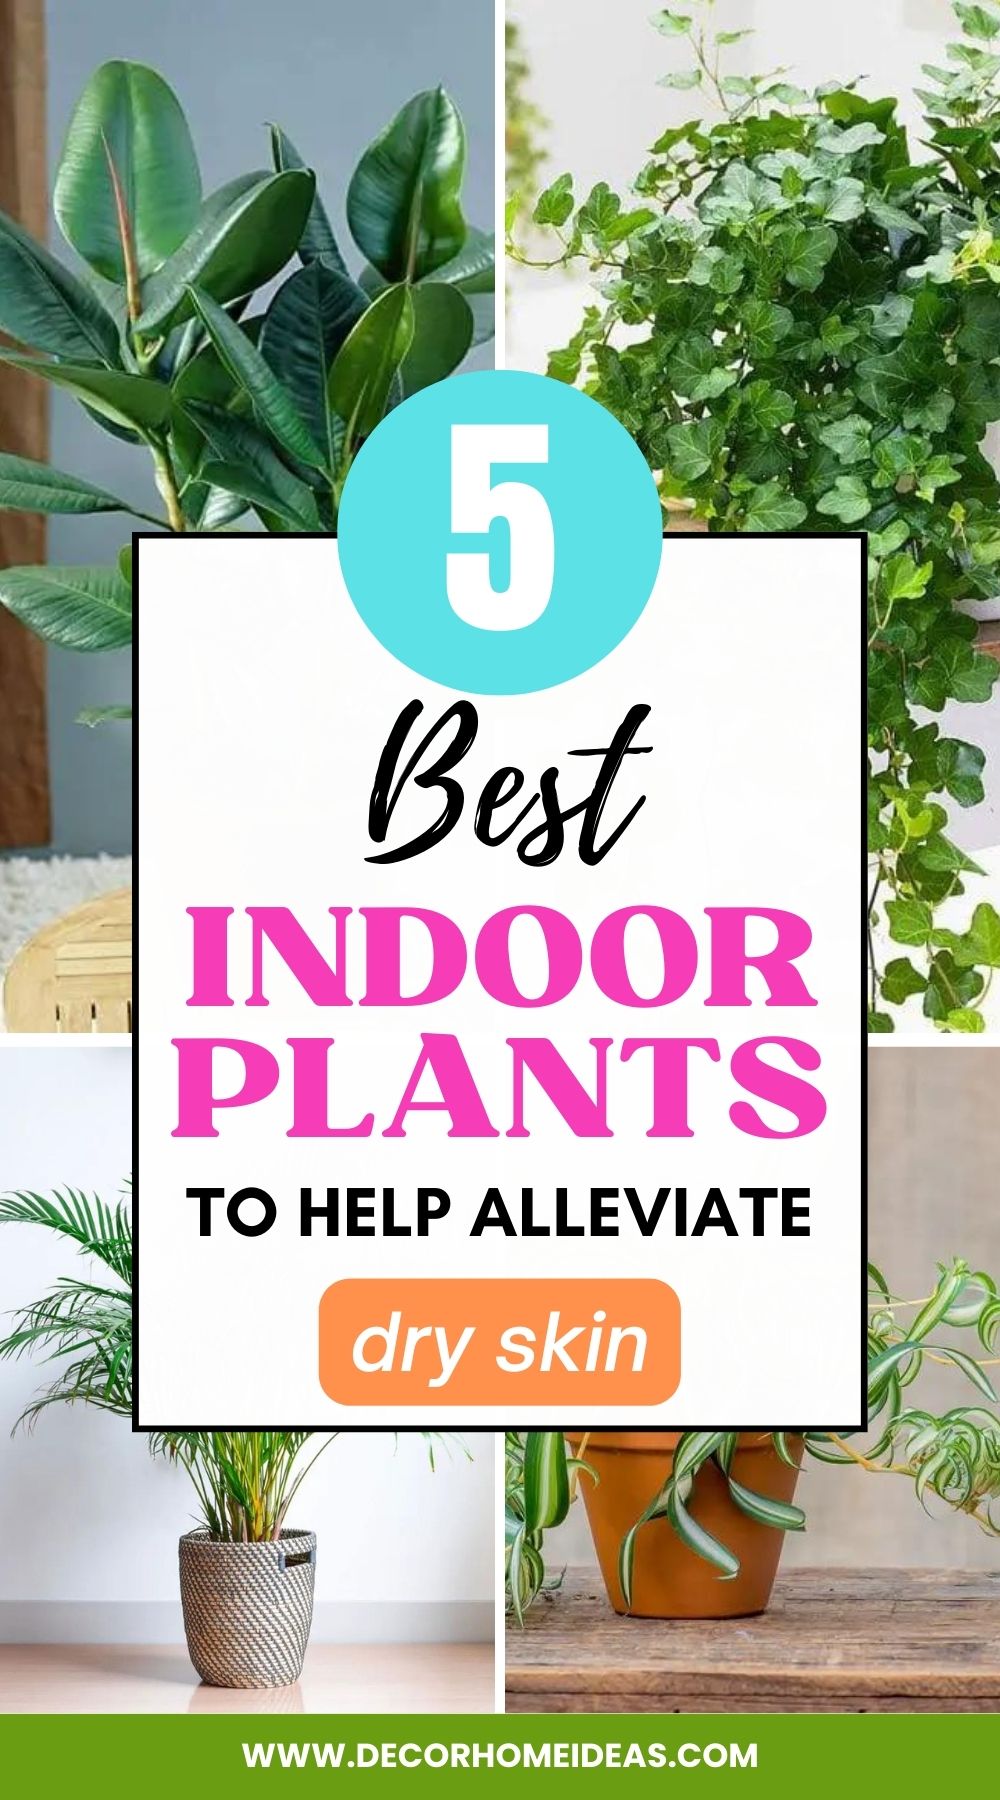 Add some greenery to your home with these 5 indoor plants that can help alleviate dry skin. Get your glow back with these easy-to-care-for plants!